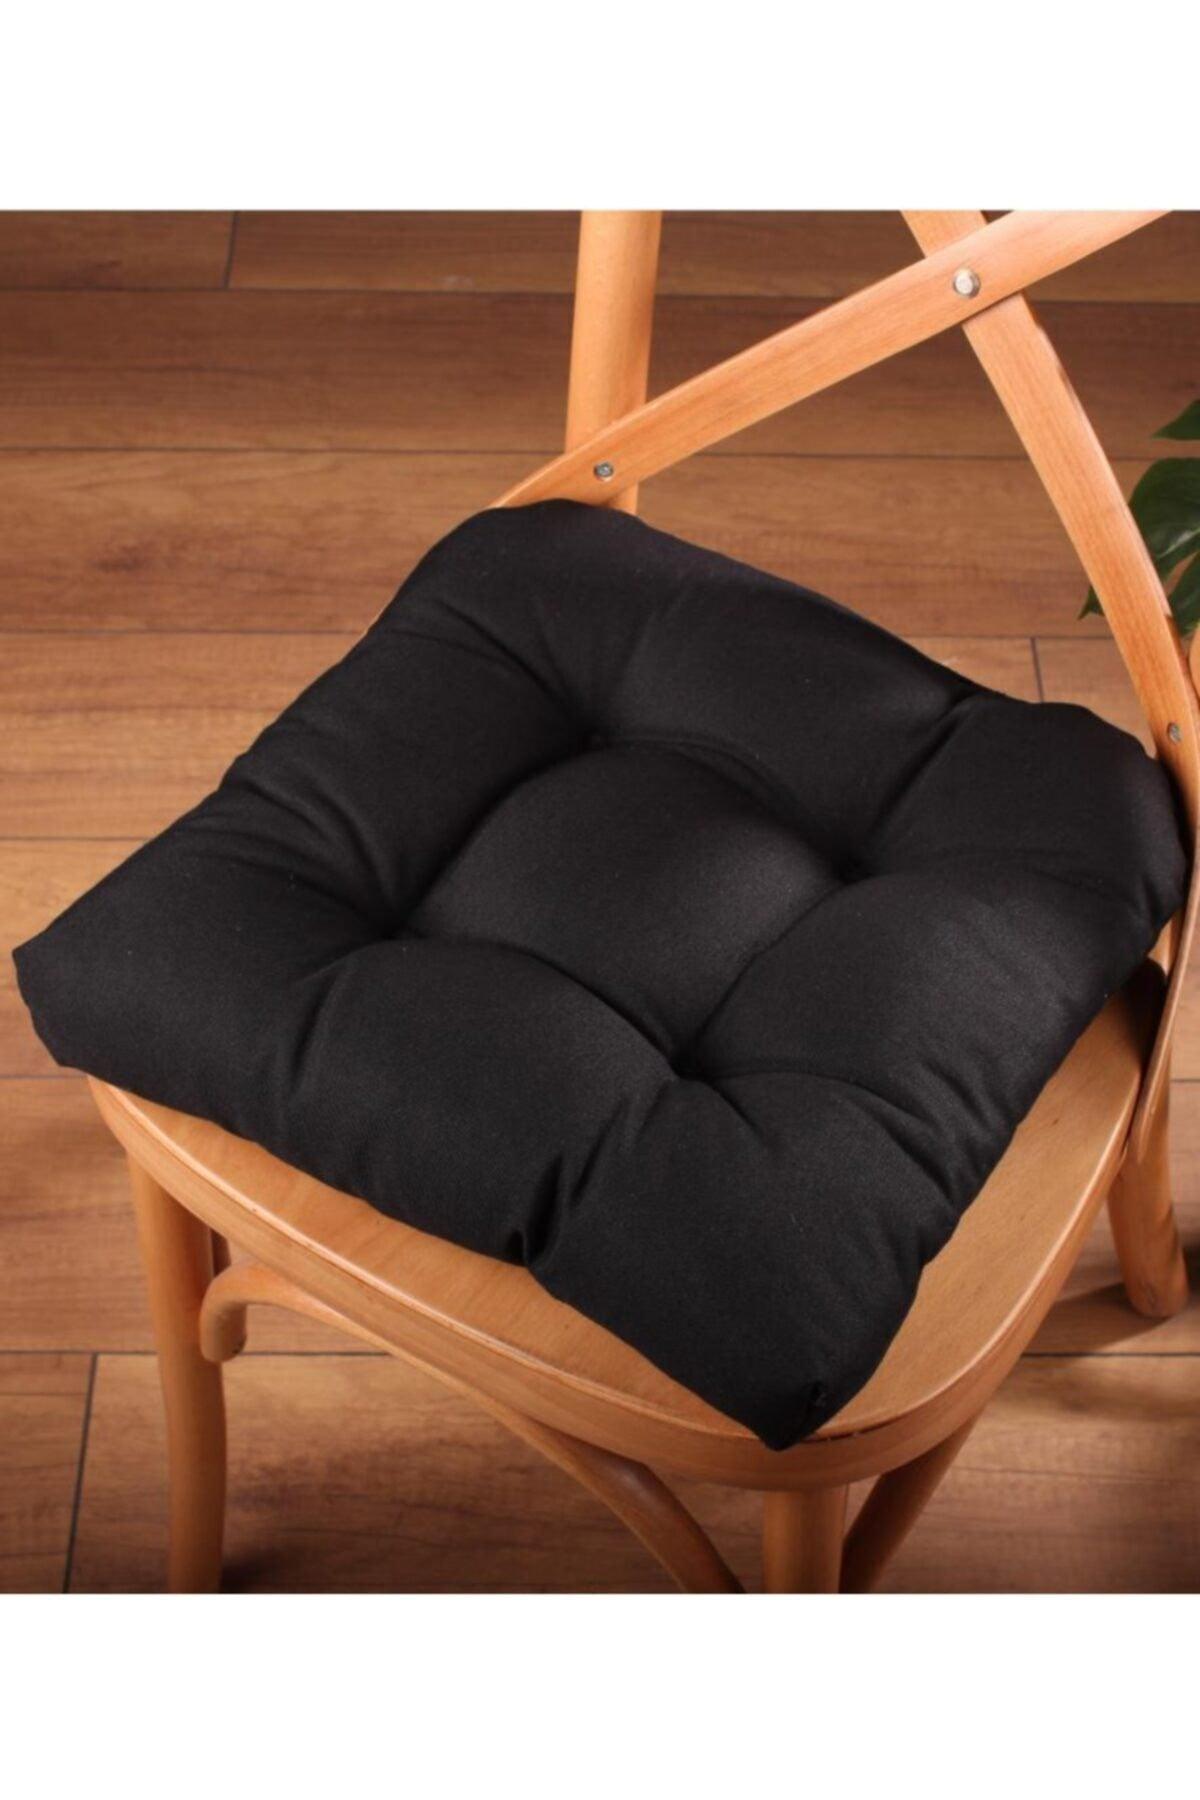 Lux Pofidik Black Chair Cushion Specially Stitched Laced 40x40cm - Swordslife